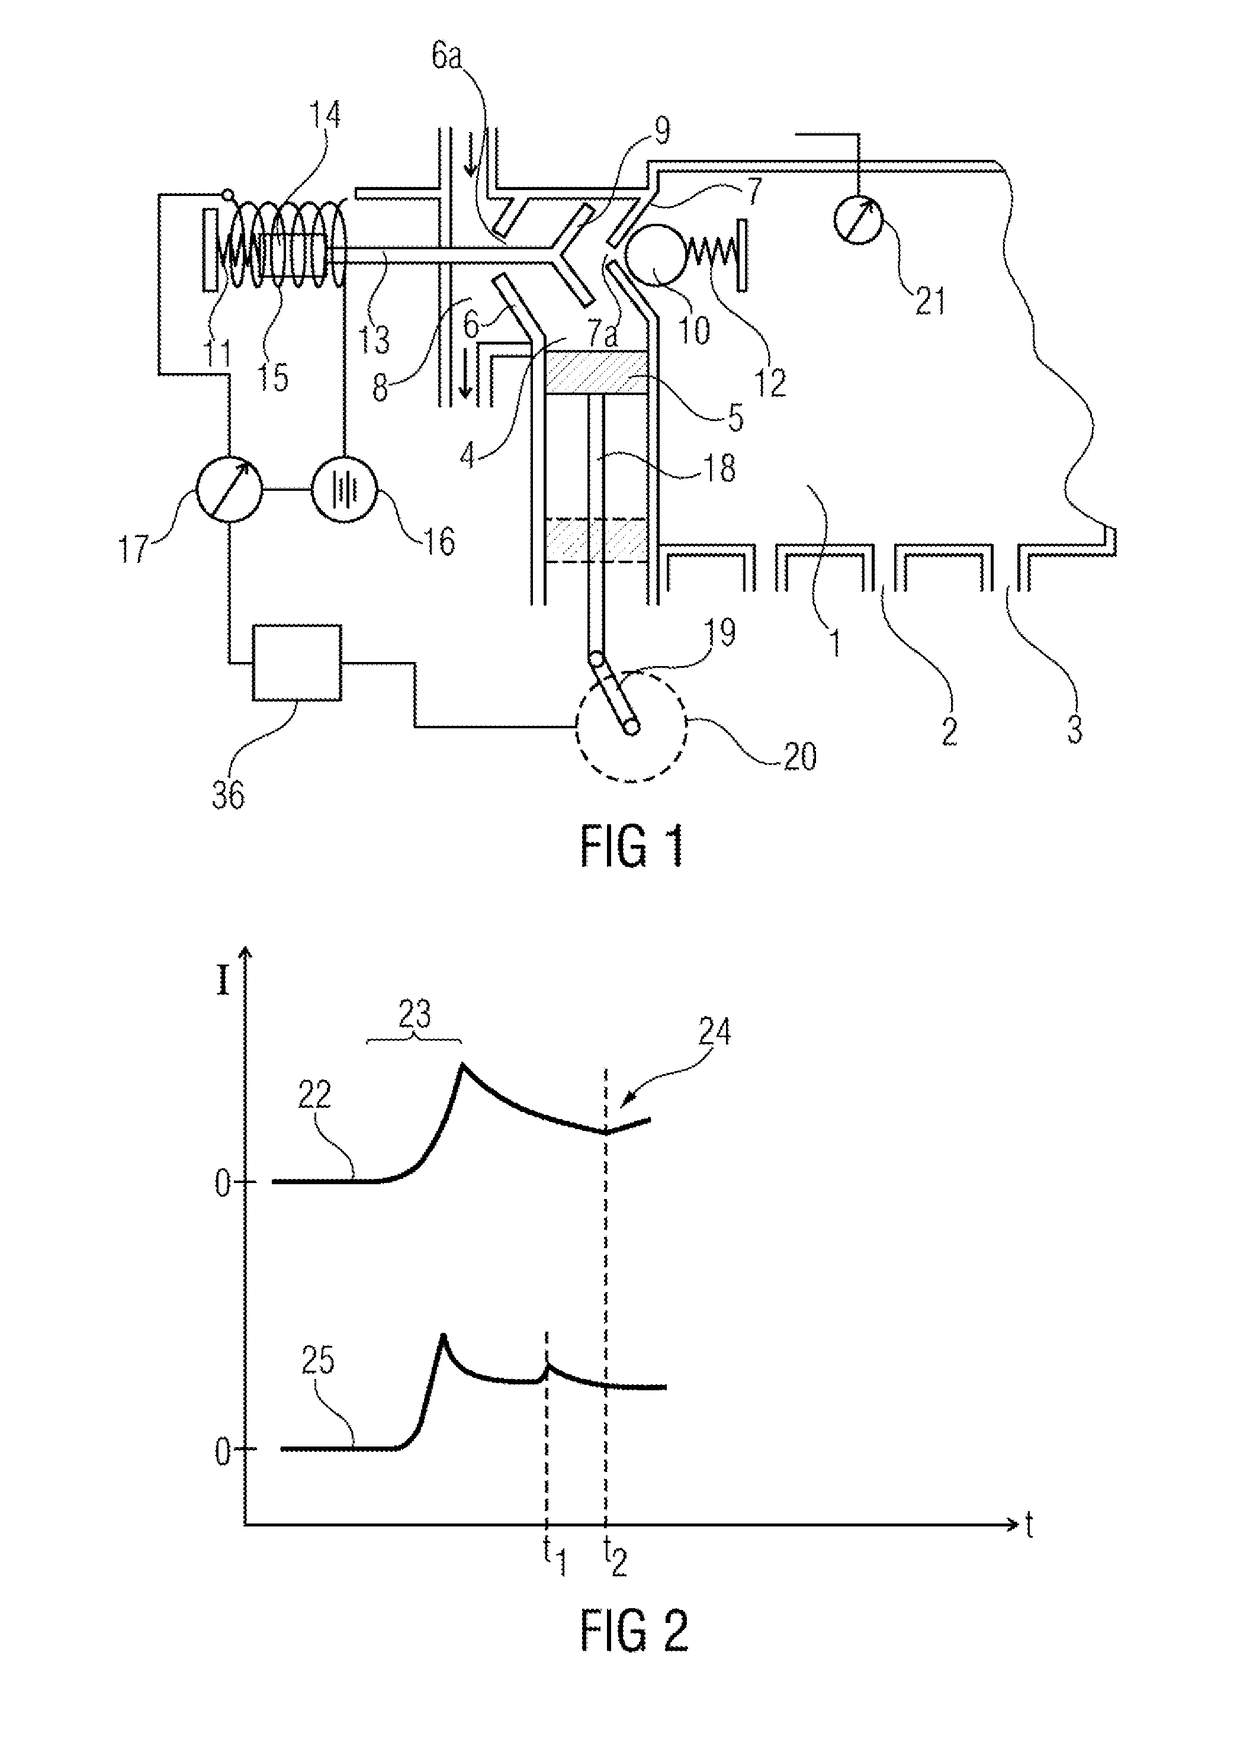 Method and device for operating a pressure reservoir, in particular for common rail injection systems in automobile engineering